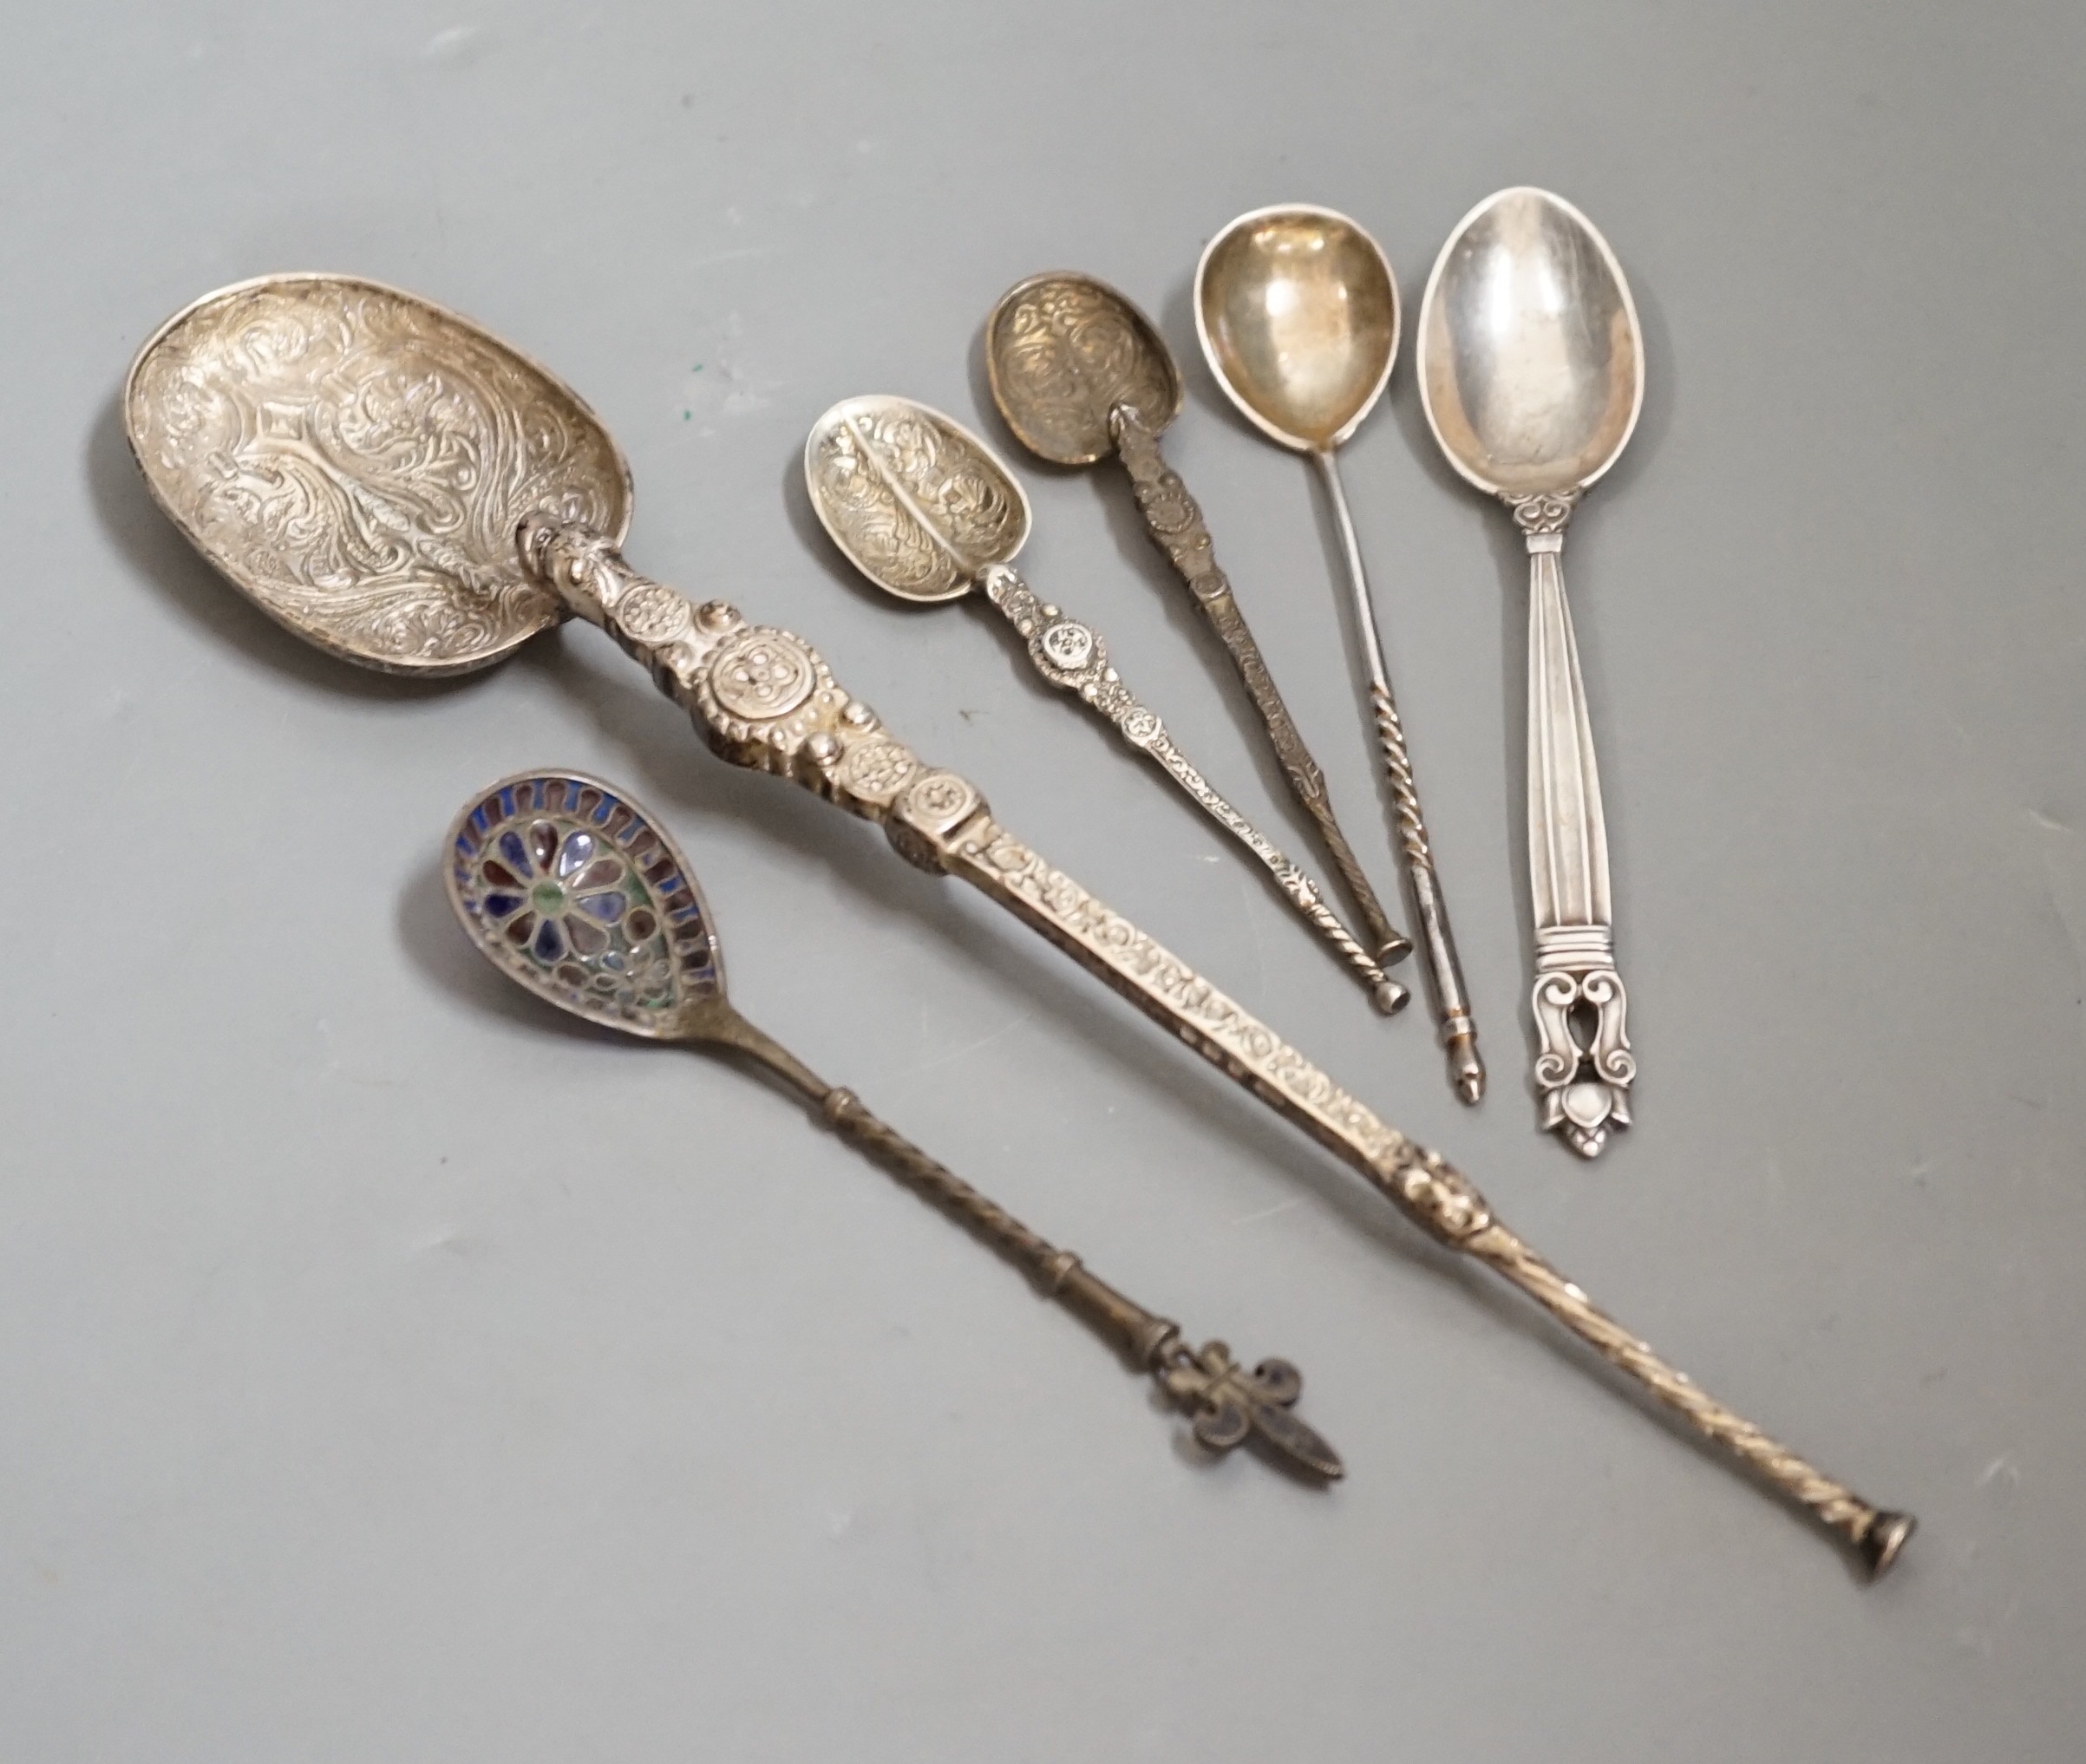 A 1930's silver replica of The Anointing spoon, 24.7cm, two similar smaller spoons, a Georg Jensen spoon, an Austro-Hungarian white metal and plique a jour spoon and a Russian tea spoon.                                  